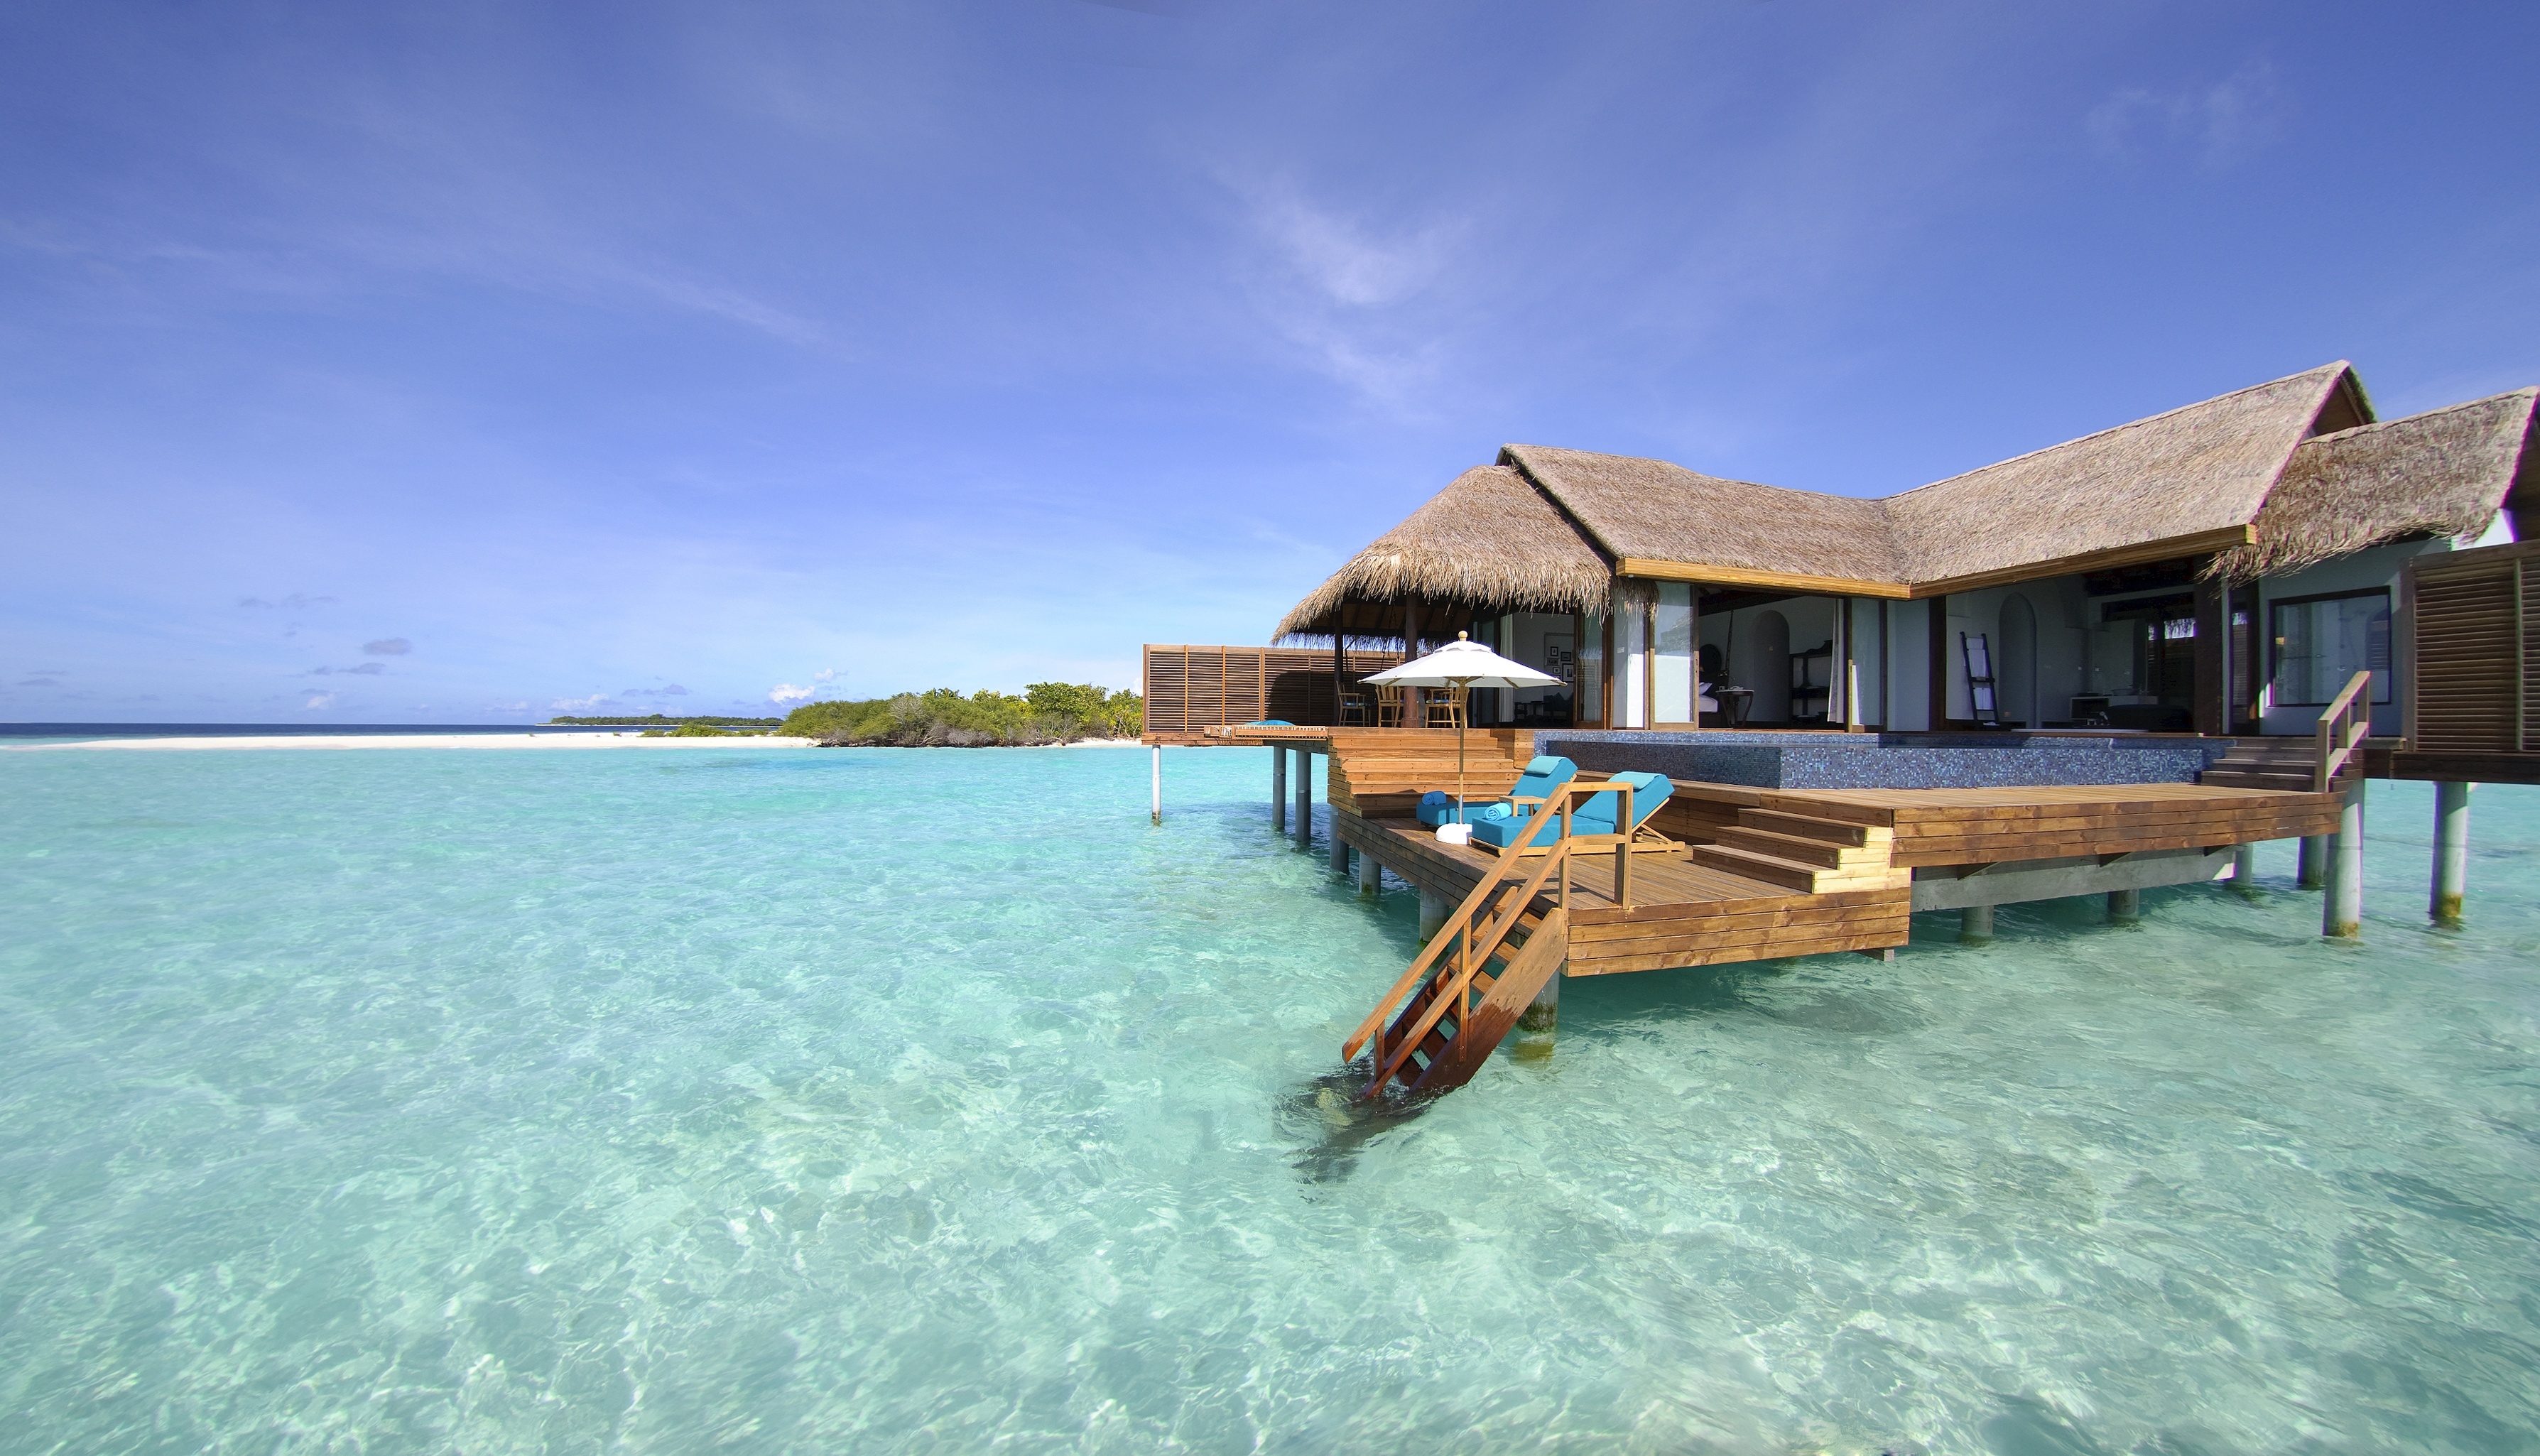 Bungalow: A vacation overwater house at the coast of the Indian Ocean, Traditional architecture. 3580x2050 HD Background.